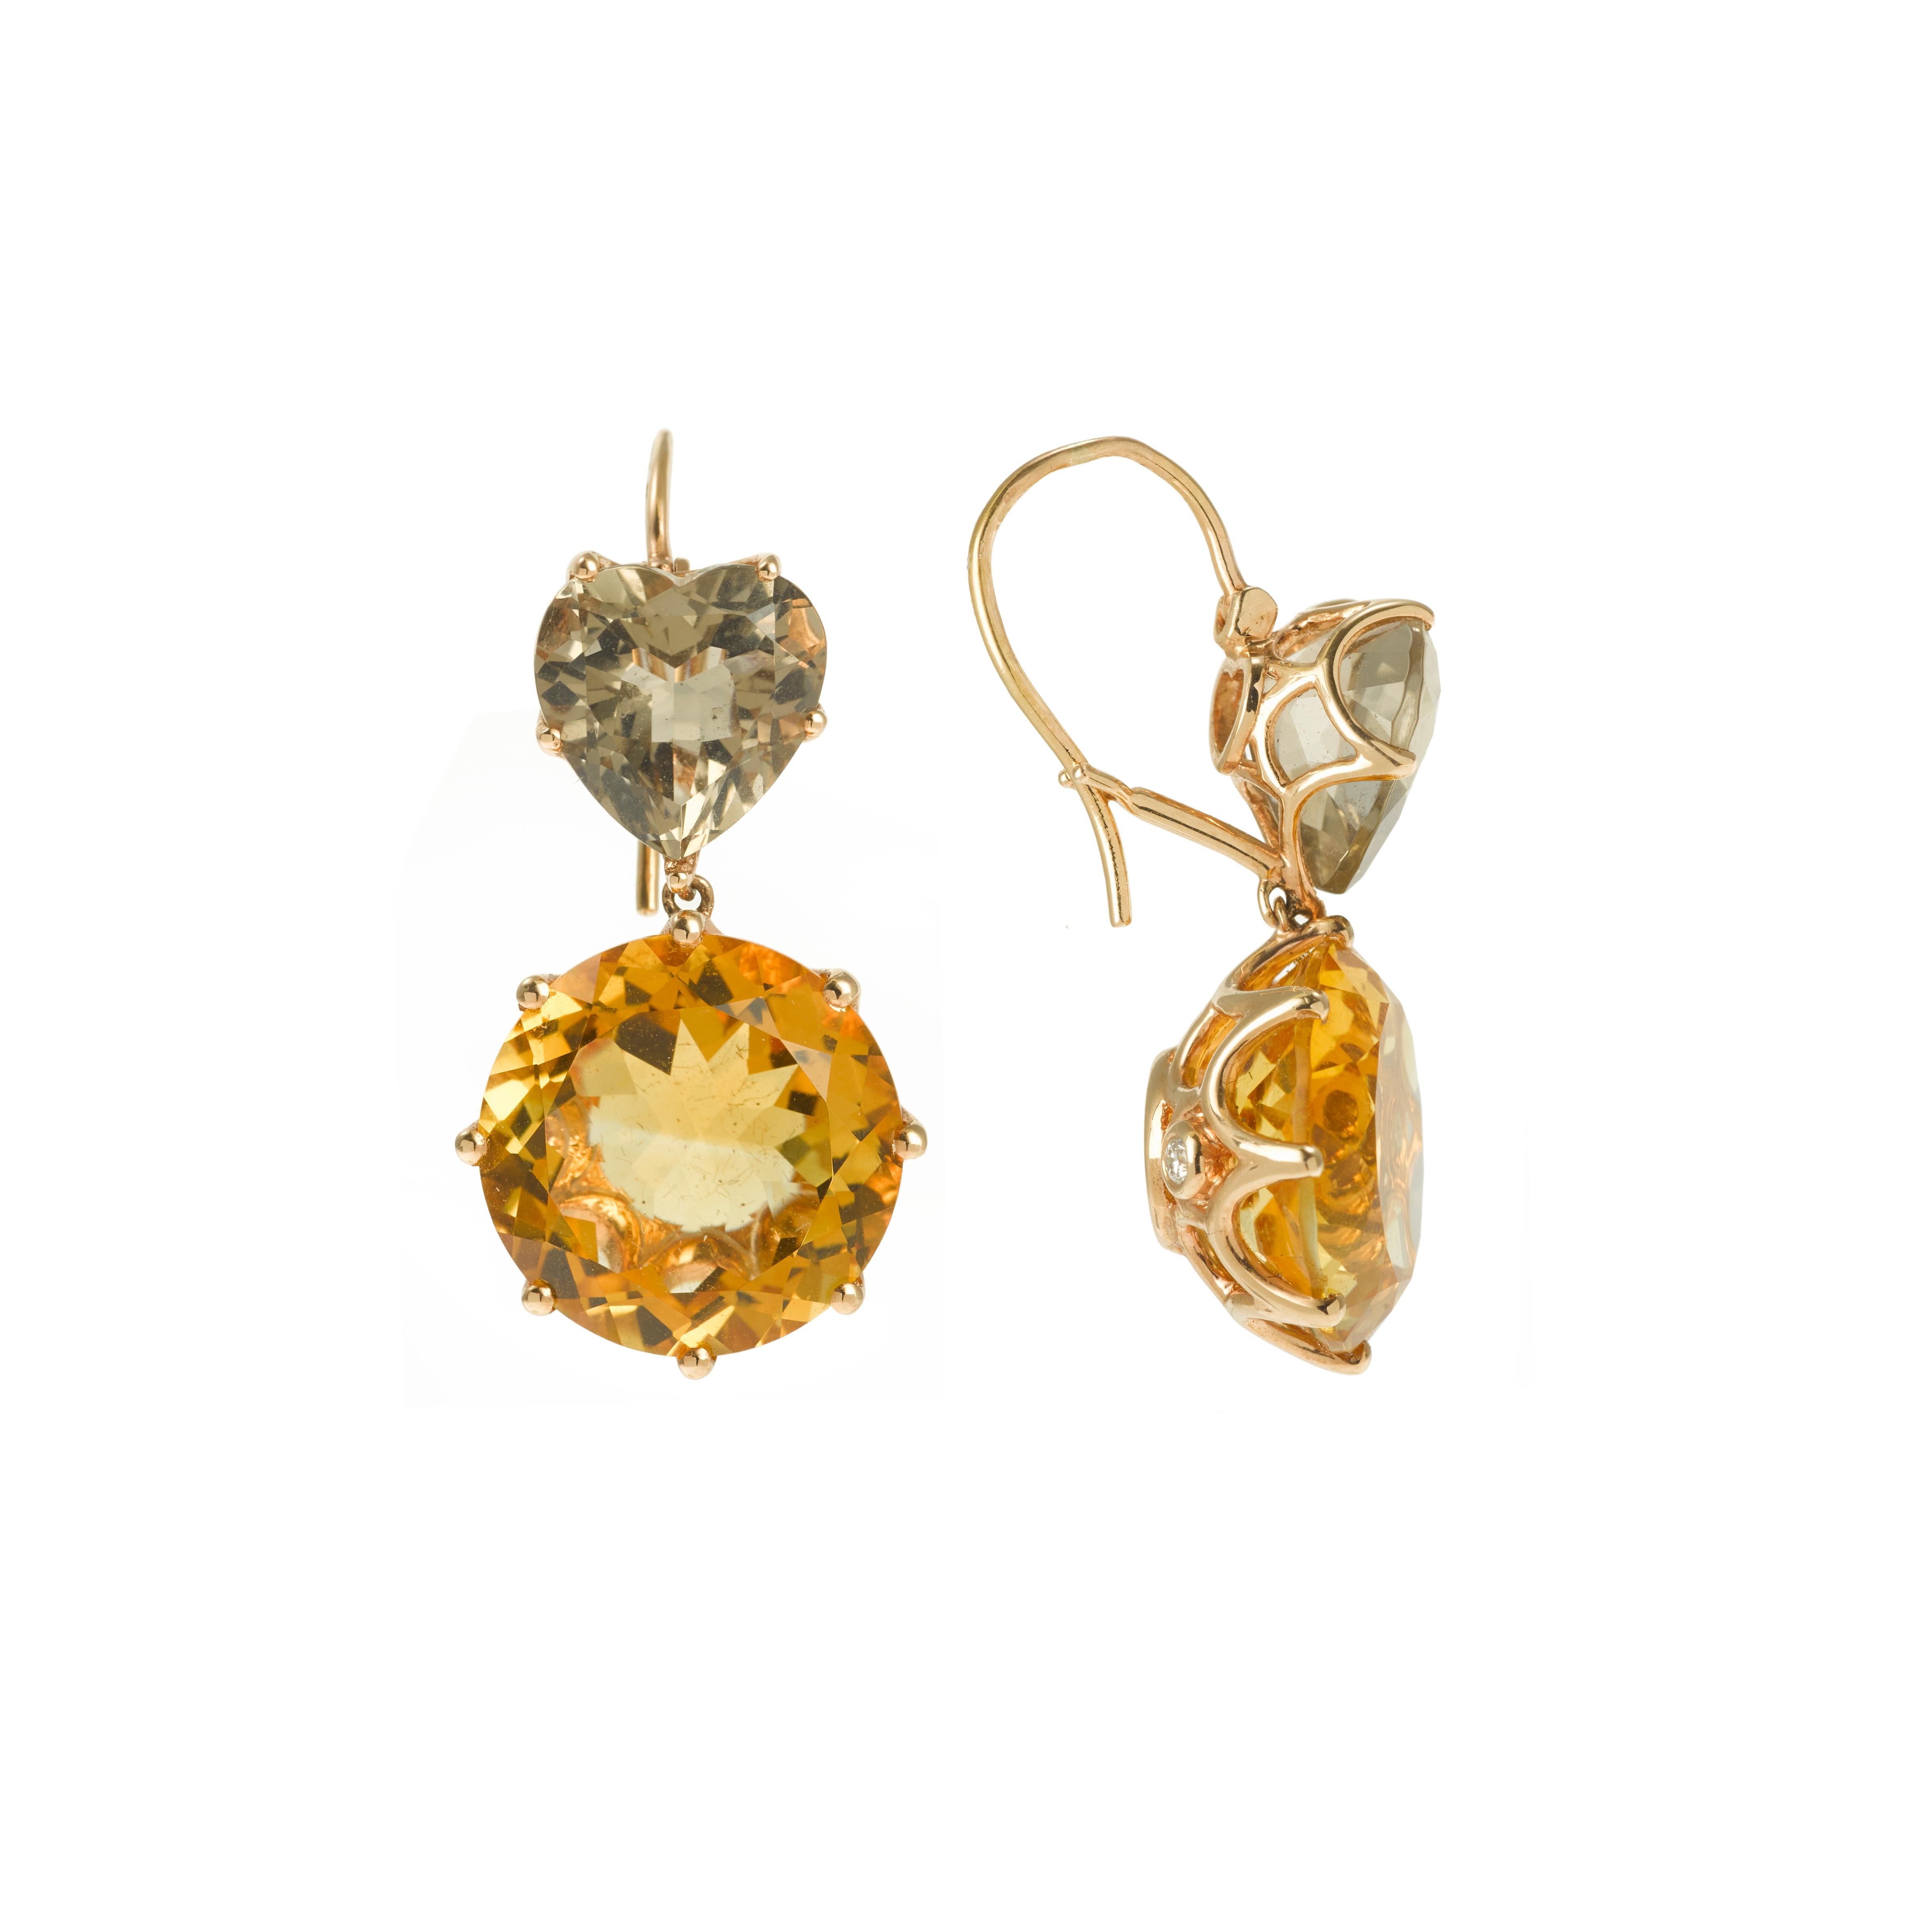 Lovely pair of earrings made of heart shaped smoky quartz  and a round citrine.
2 diamonds behind each earring !

18 carat yellow gold  750 / 1000th, eagle's Head stamp.

Smoky Quartz dimensions: 0.9 X 10 mm
Citrine diameter: 13.5mm

Height: 3